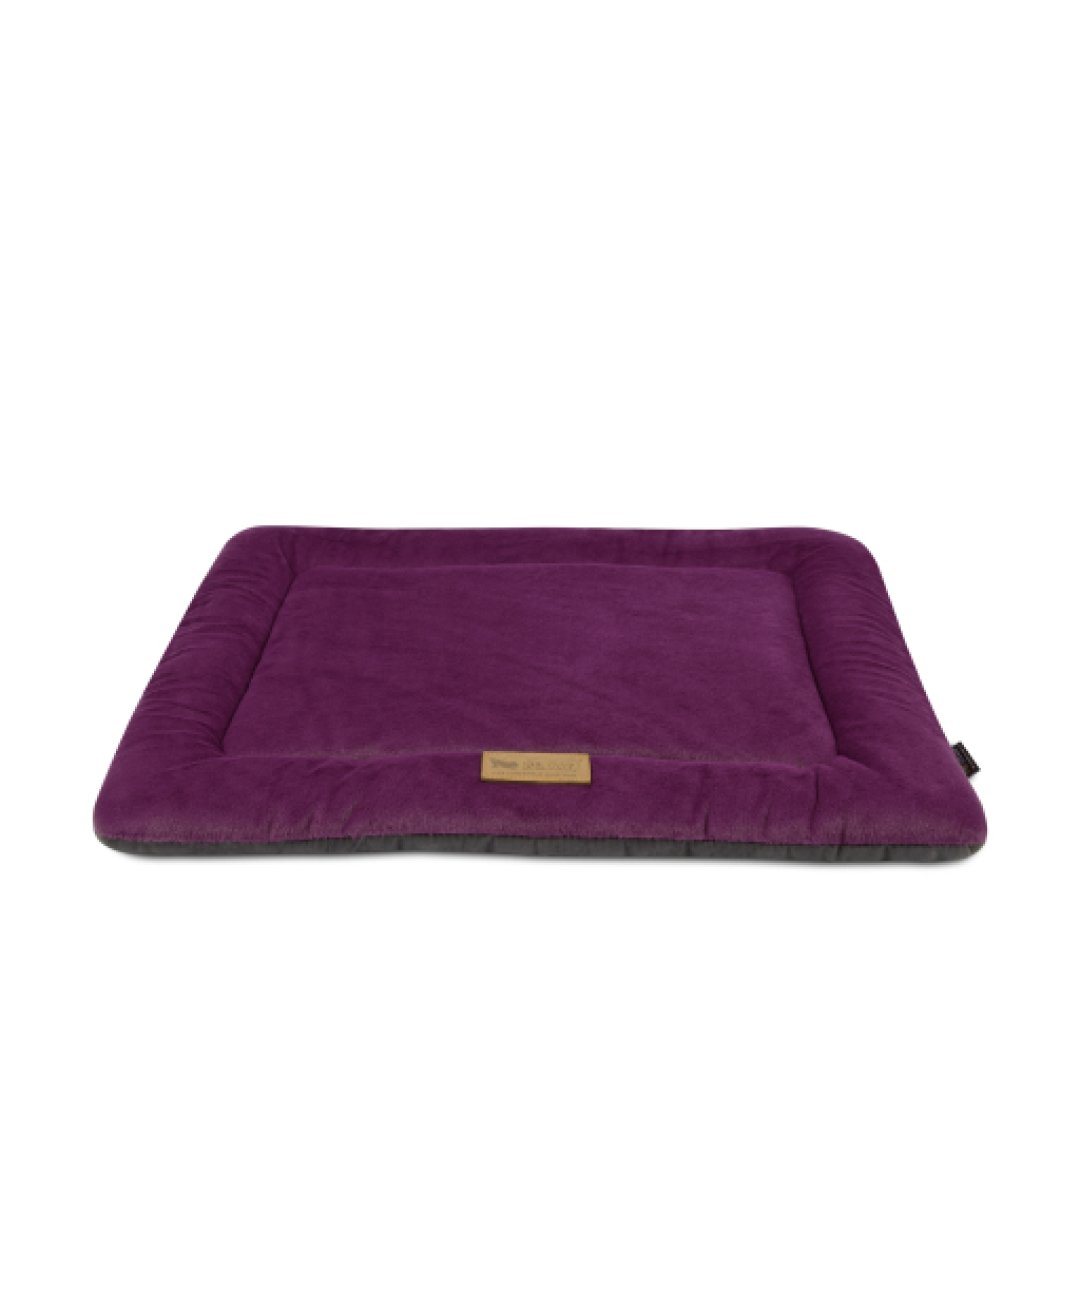 P.L.A.Y. Pet Pad Bed Dog Bed PLAY XS Purple 